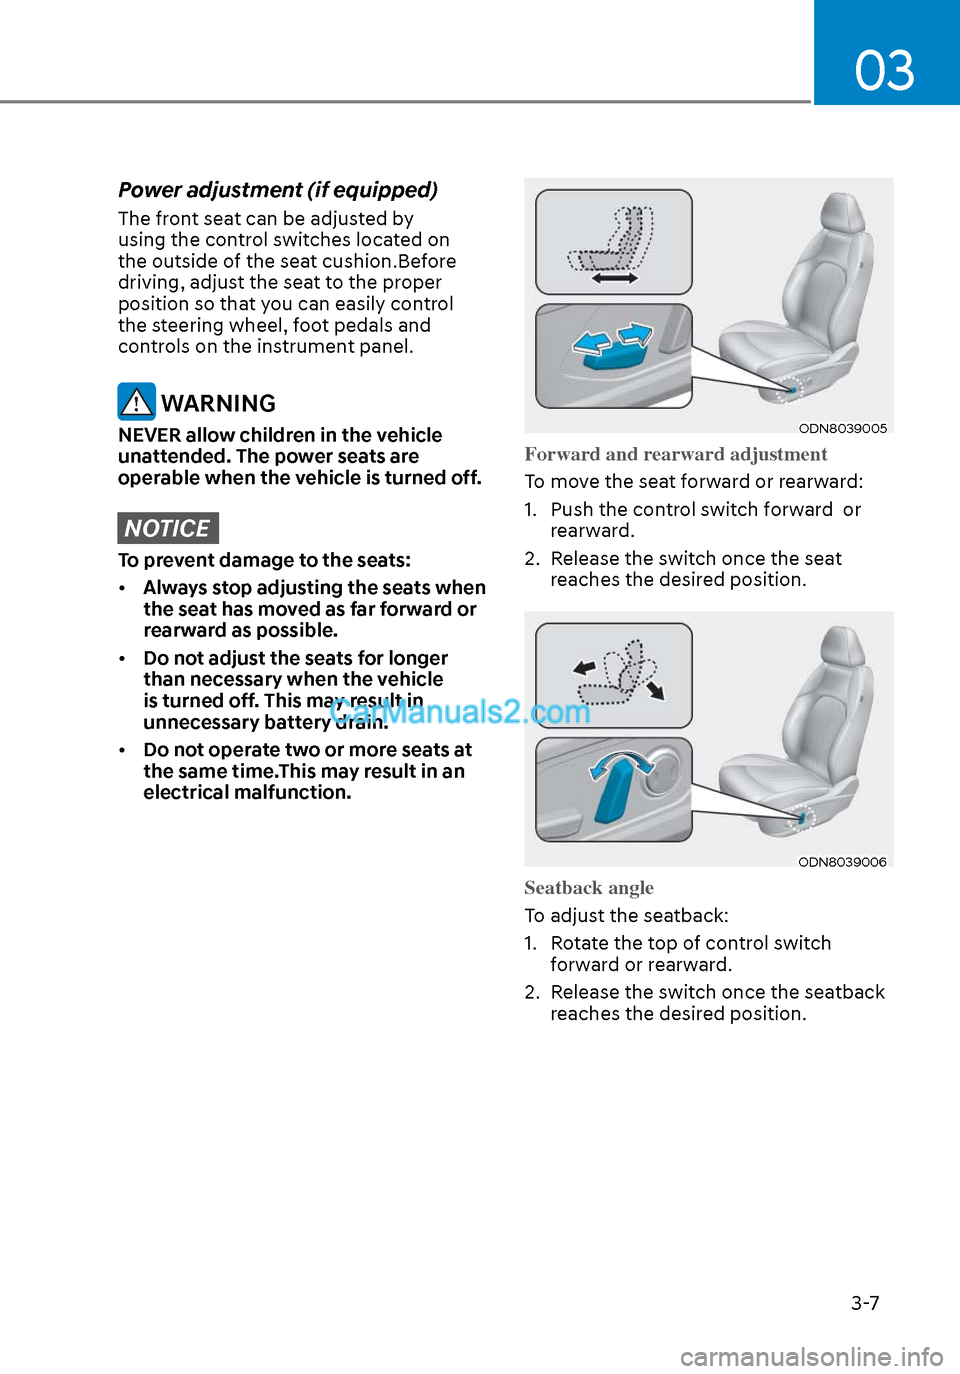 Hyundai Sonata 2020 Owners Guide 03
3-7
Power adjustment (if equipped) 
The front seat can be adjusted by 
using the control switches located on 
the outside of the seat cushion.Before 
driving, adjust the seat to the proper 
positio